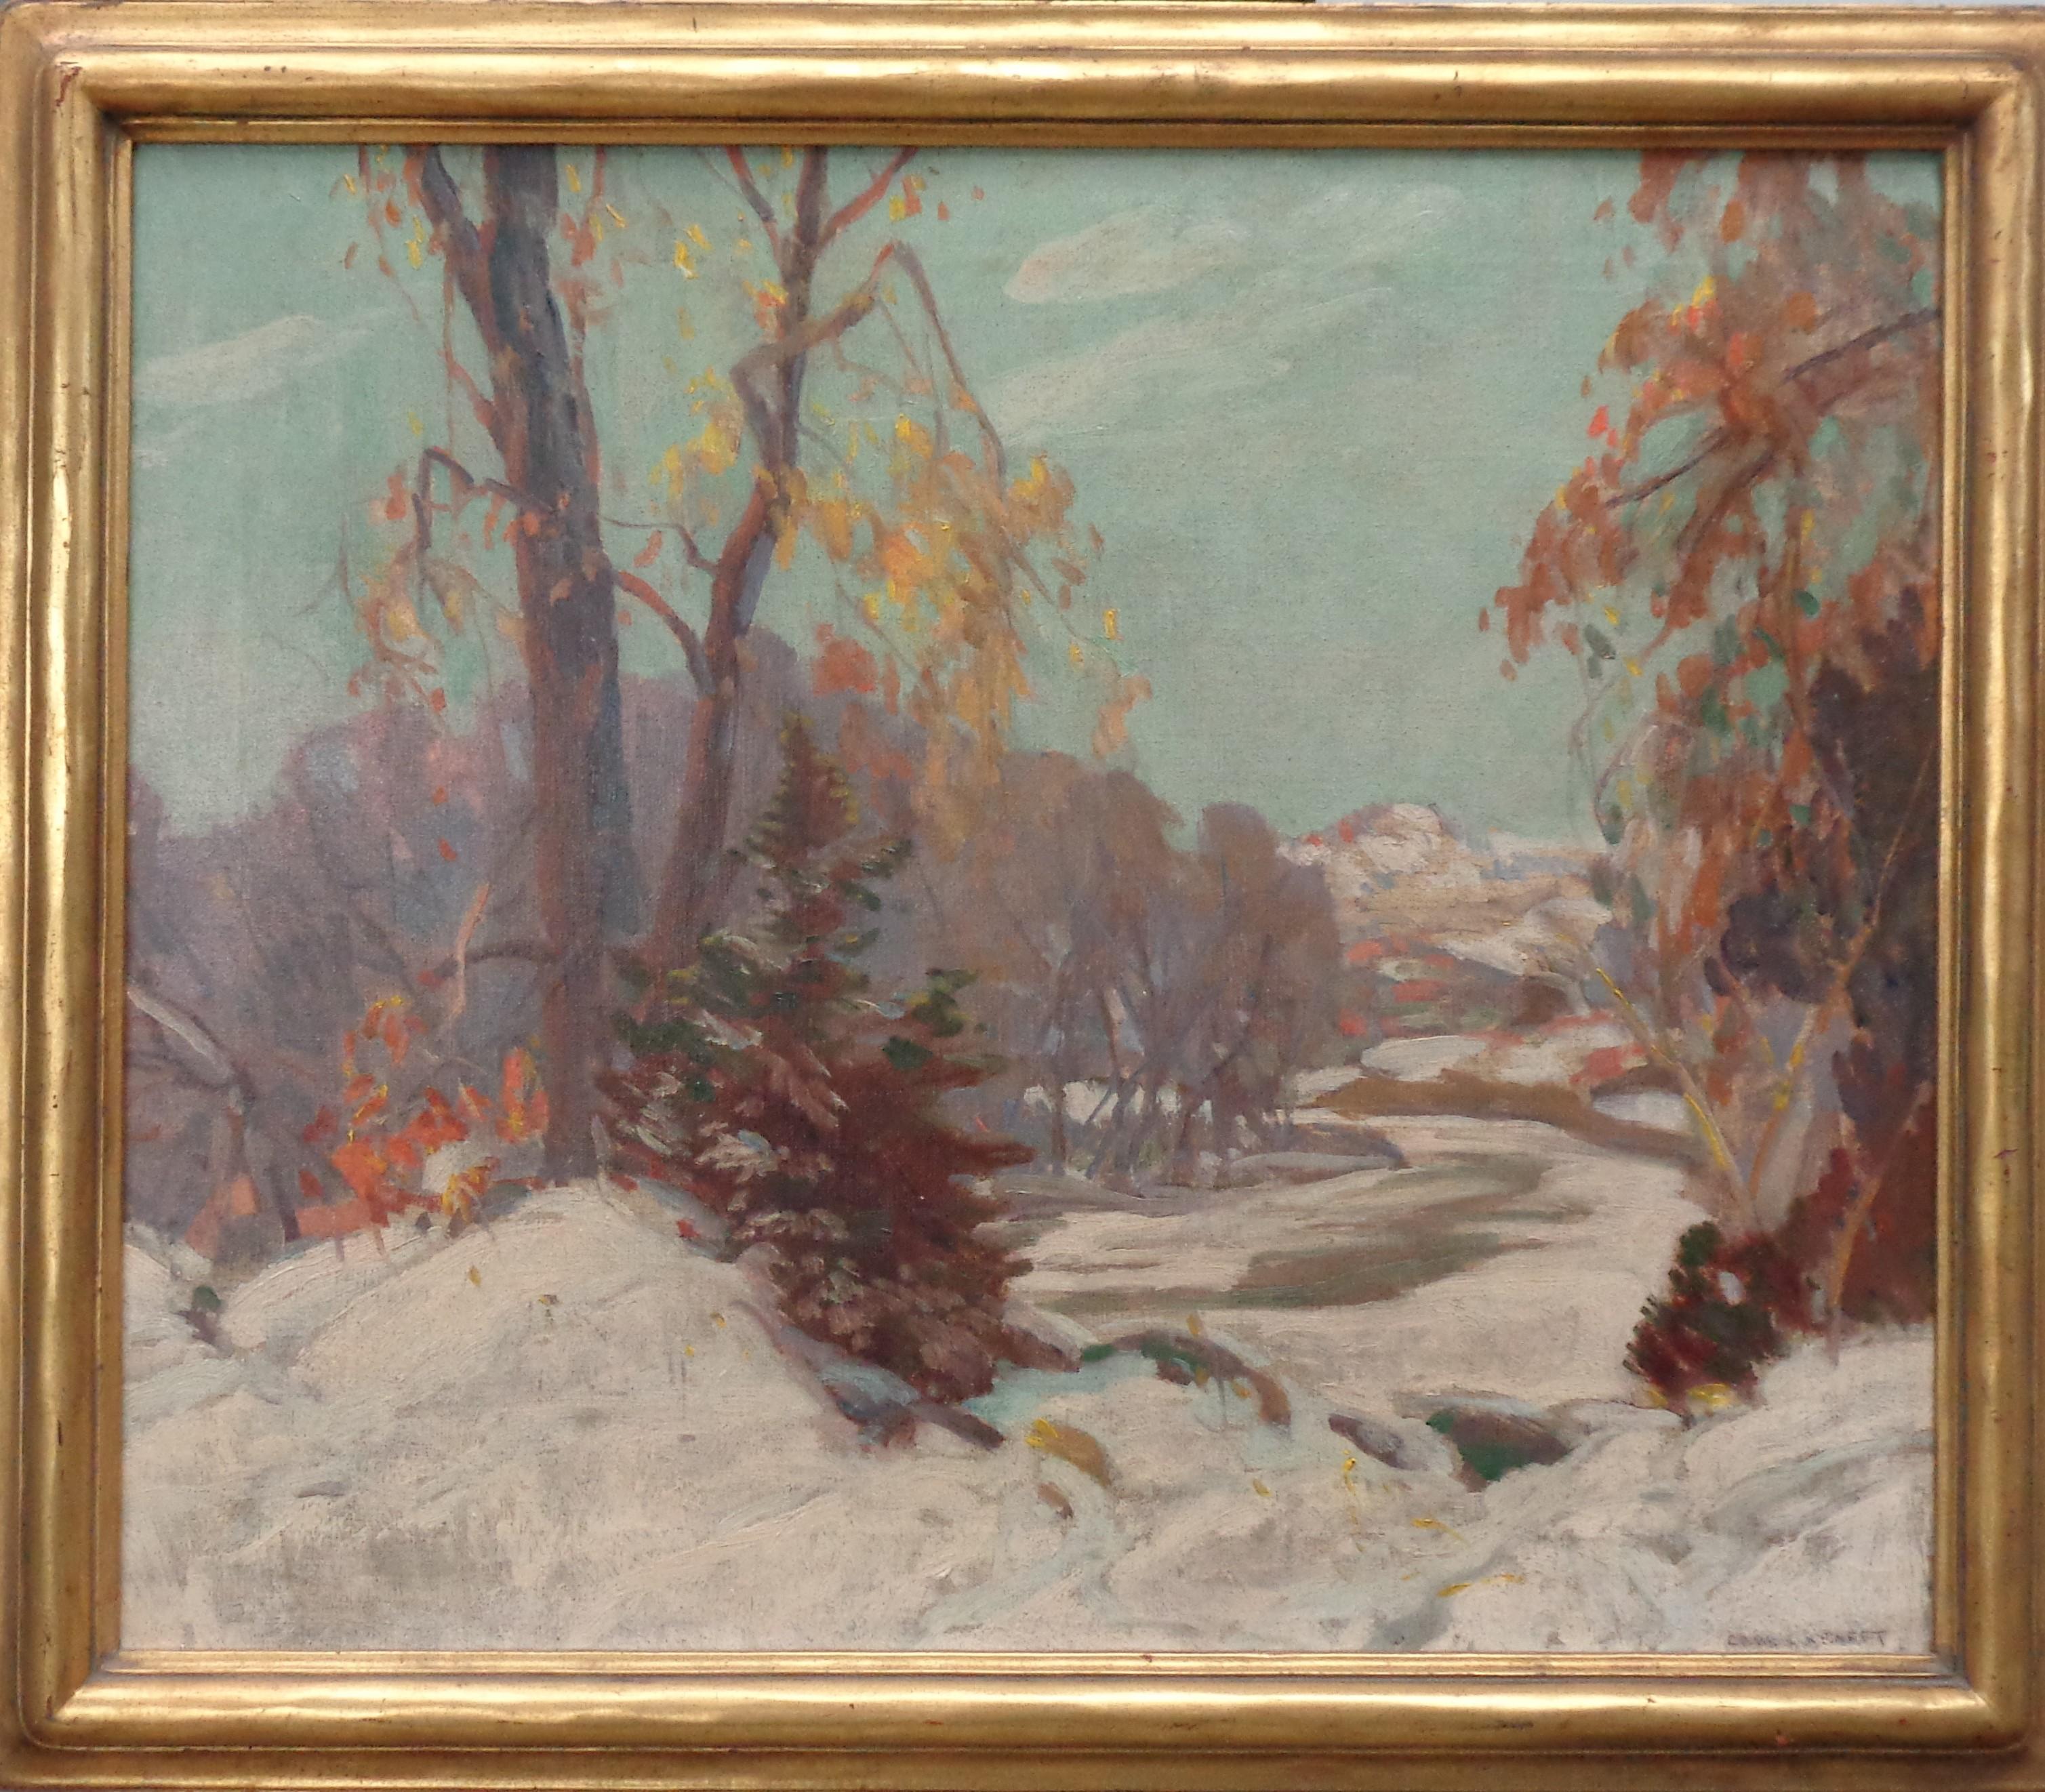 Winter Scene
oil/canvas
20 x 24 image size, 23.75 x 27.50 framed
Here is a very nice winter snow scene oil painting on canvas by Midwest American Artist Karl Rudolph Krafft.  Original frame shows wear from age with missing gold in spots around the